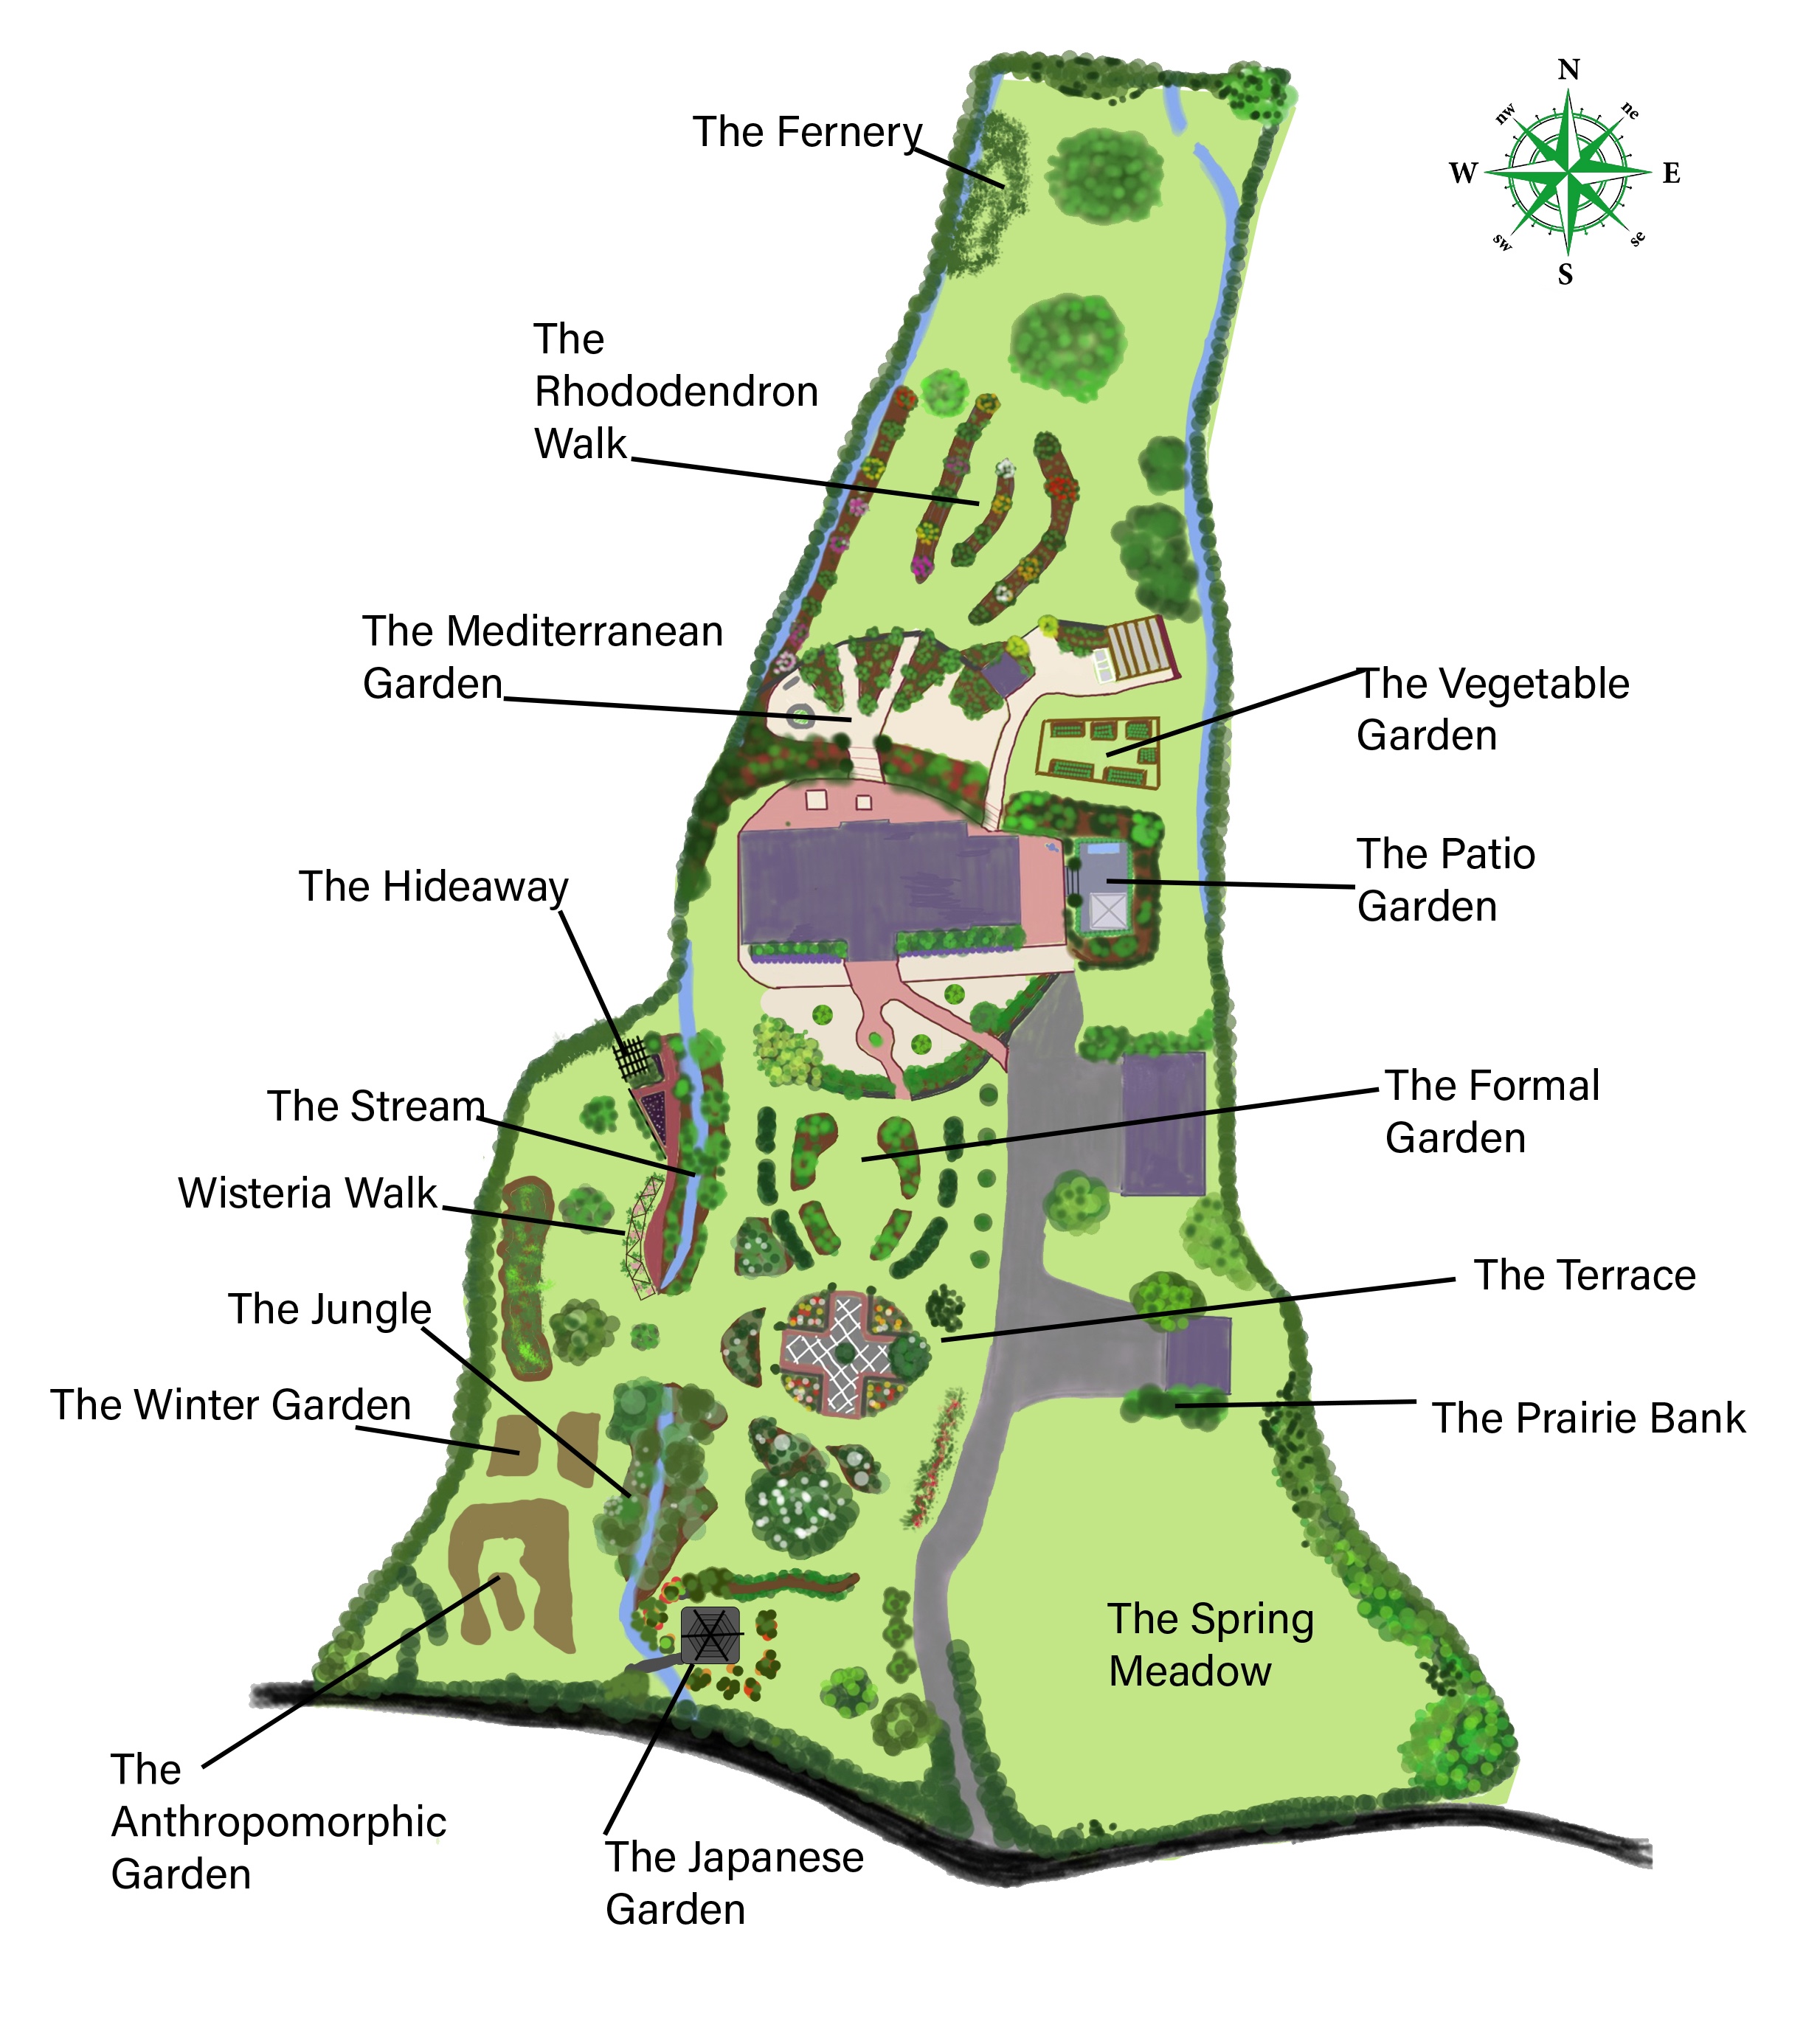 Plan of the gardens at Greenfields